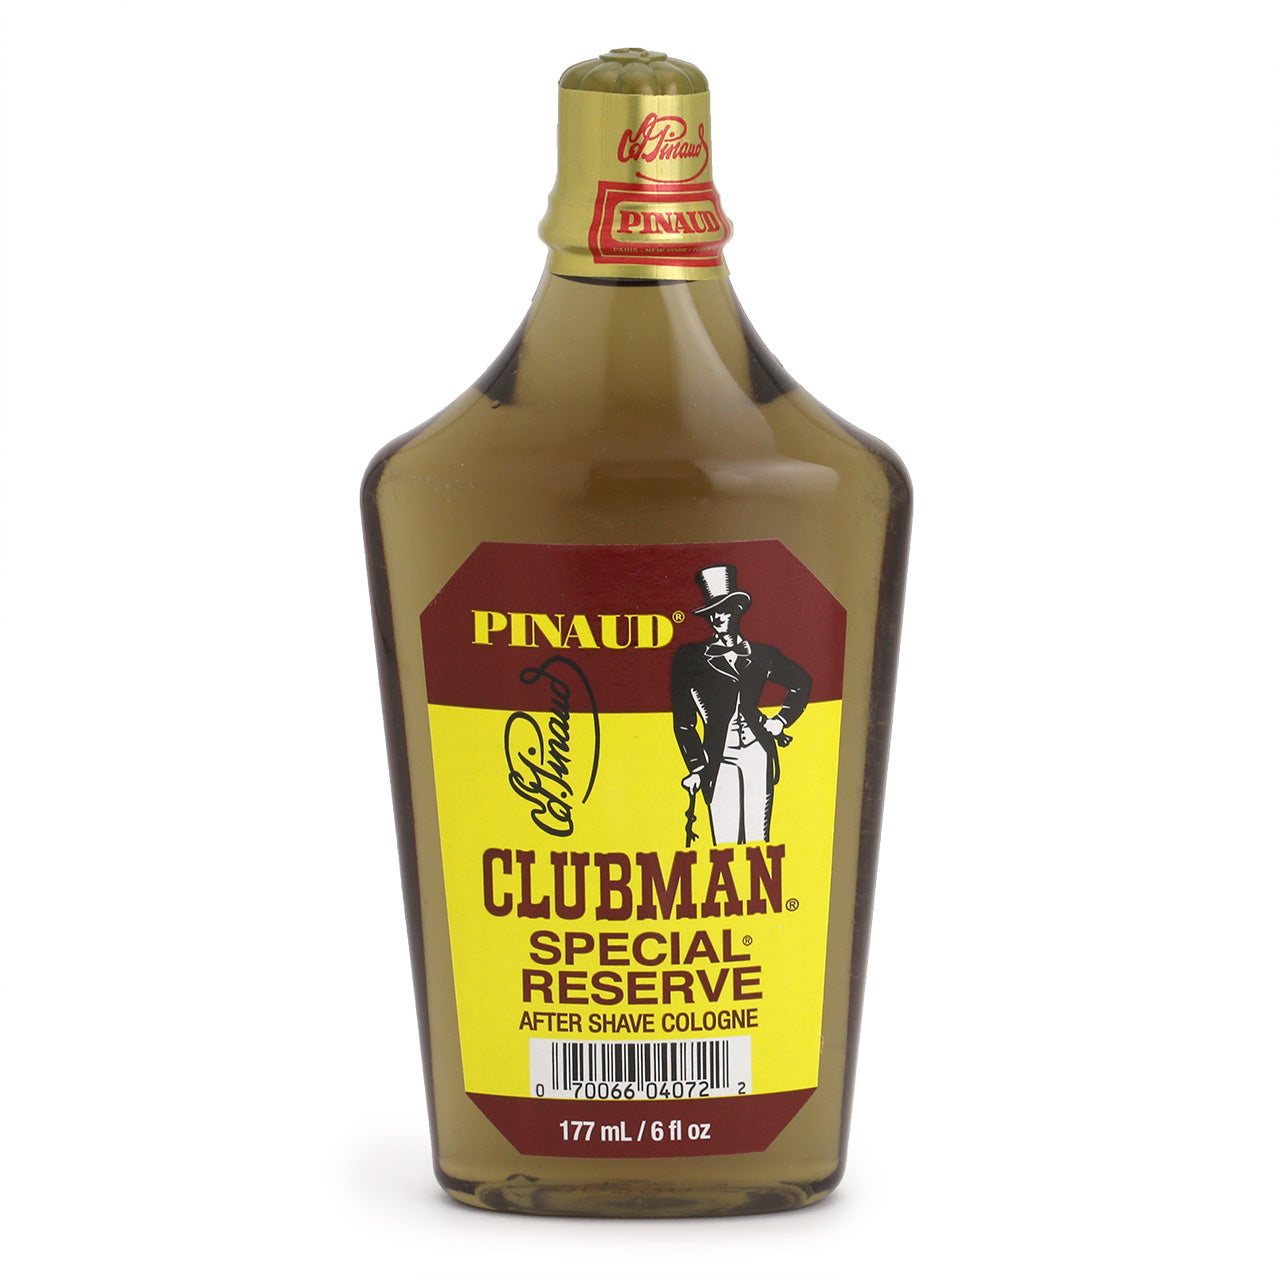 Pinaud Clubman Special Reserve has retro label and bottle shape